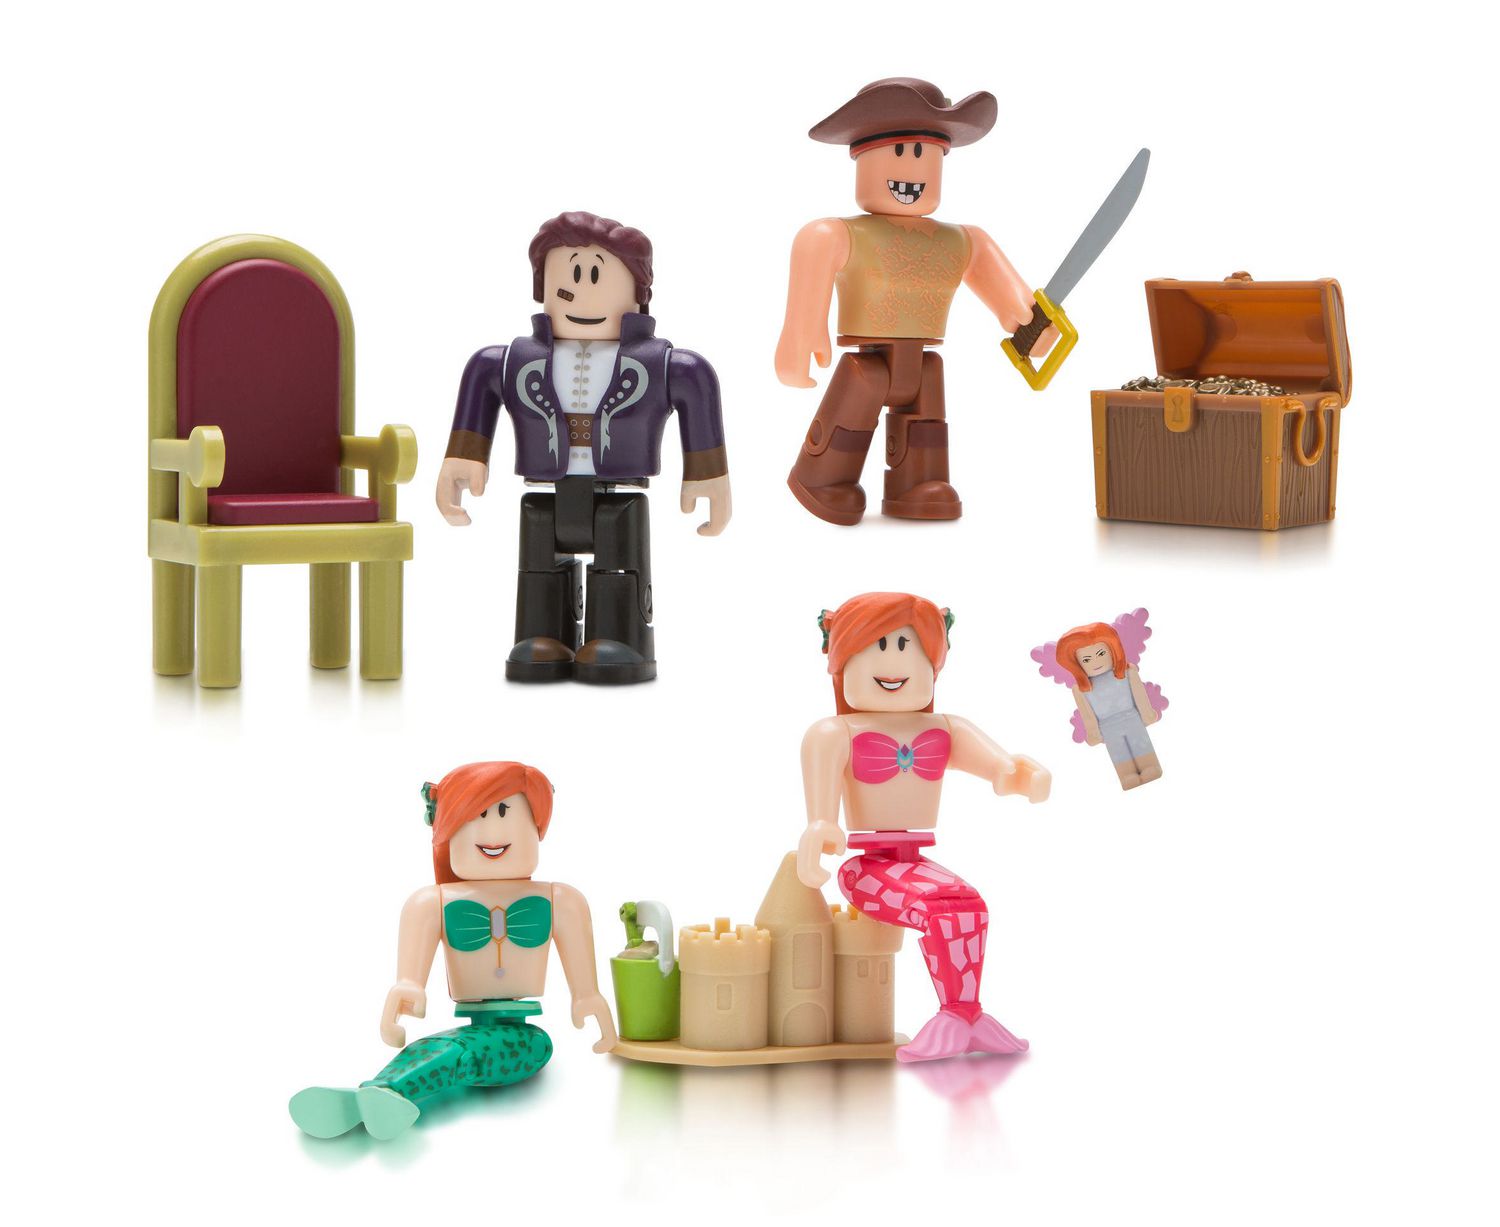 Roblox Celebrity Neverland Lagoon Multipack Walmart Canada - roblox figures with code toys games bricks figurines on carousell